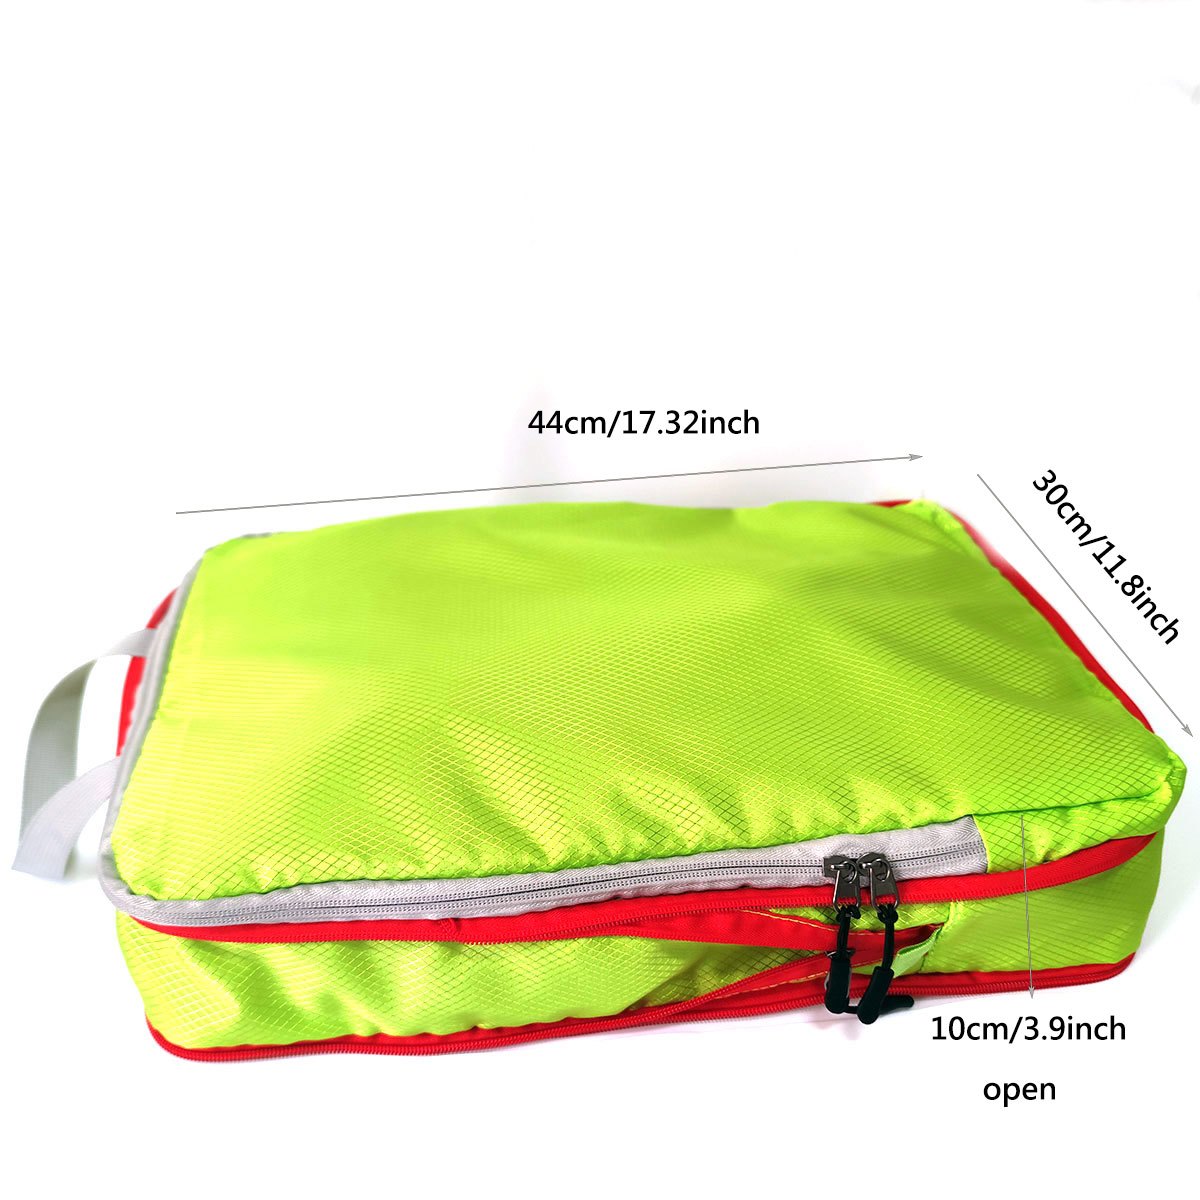 Generic Compression Packing Cubes Lightweight Travel Accessories Green 3Pcs  @ Best Price Online